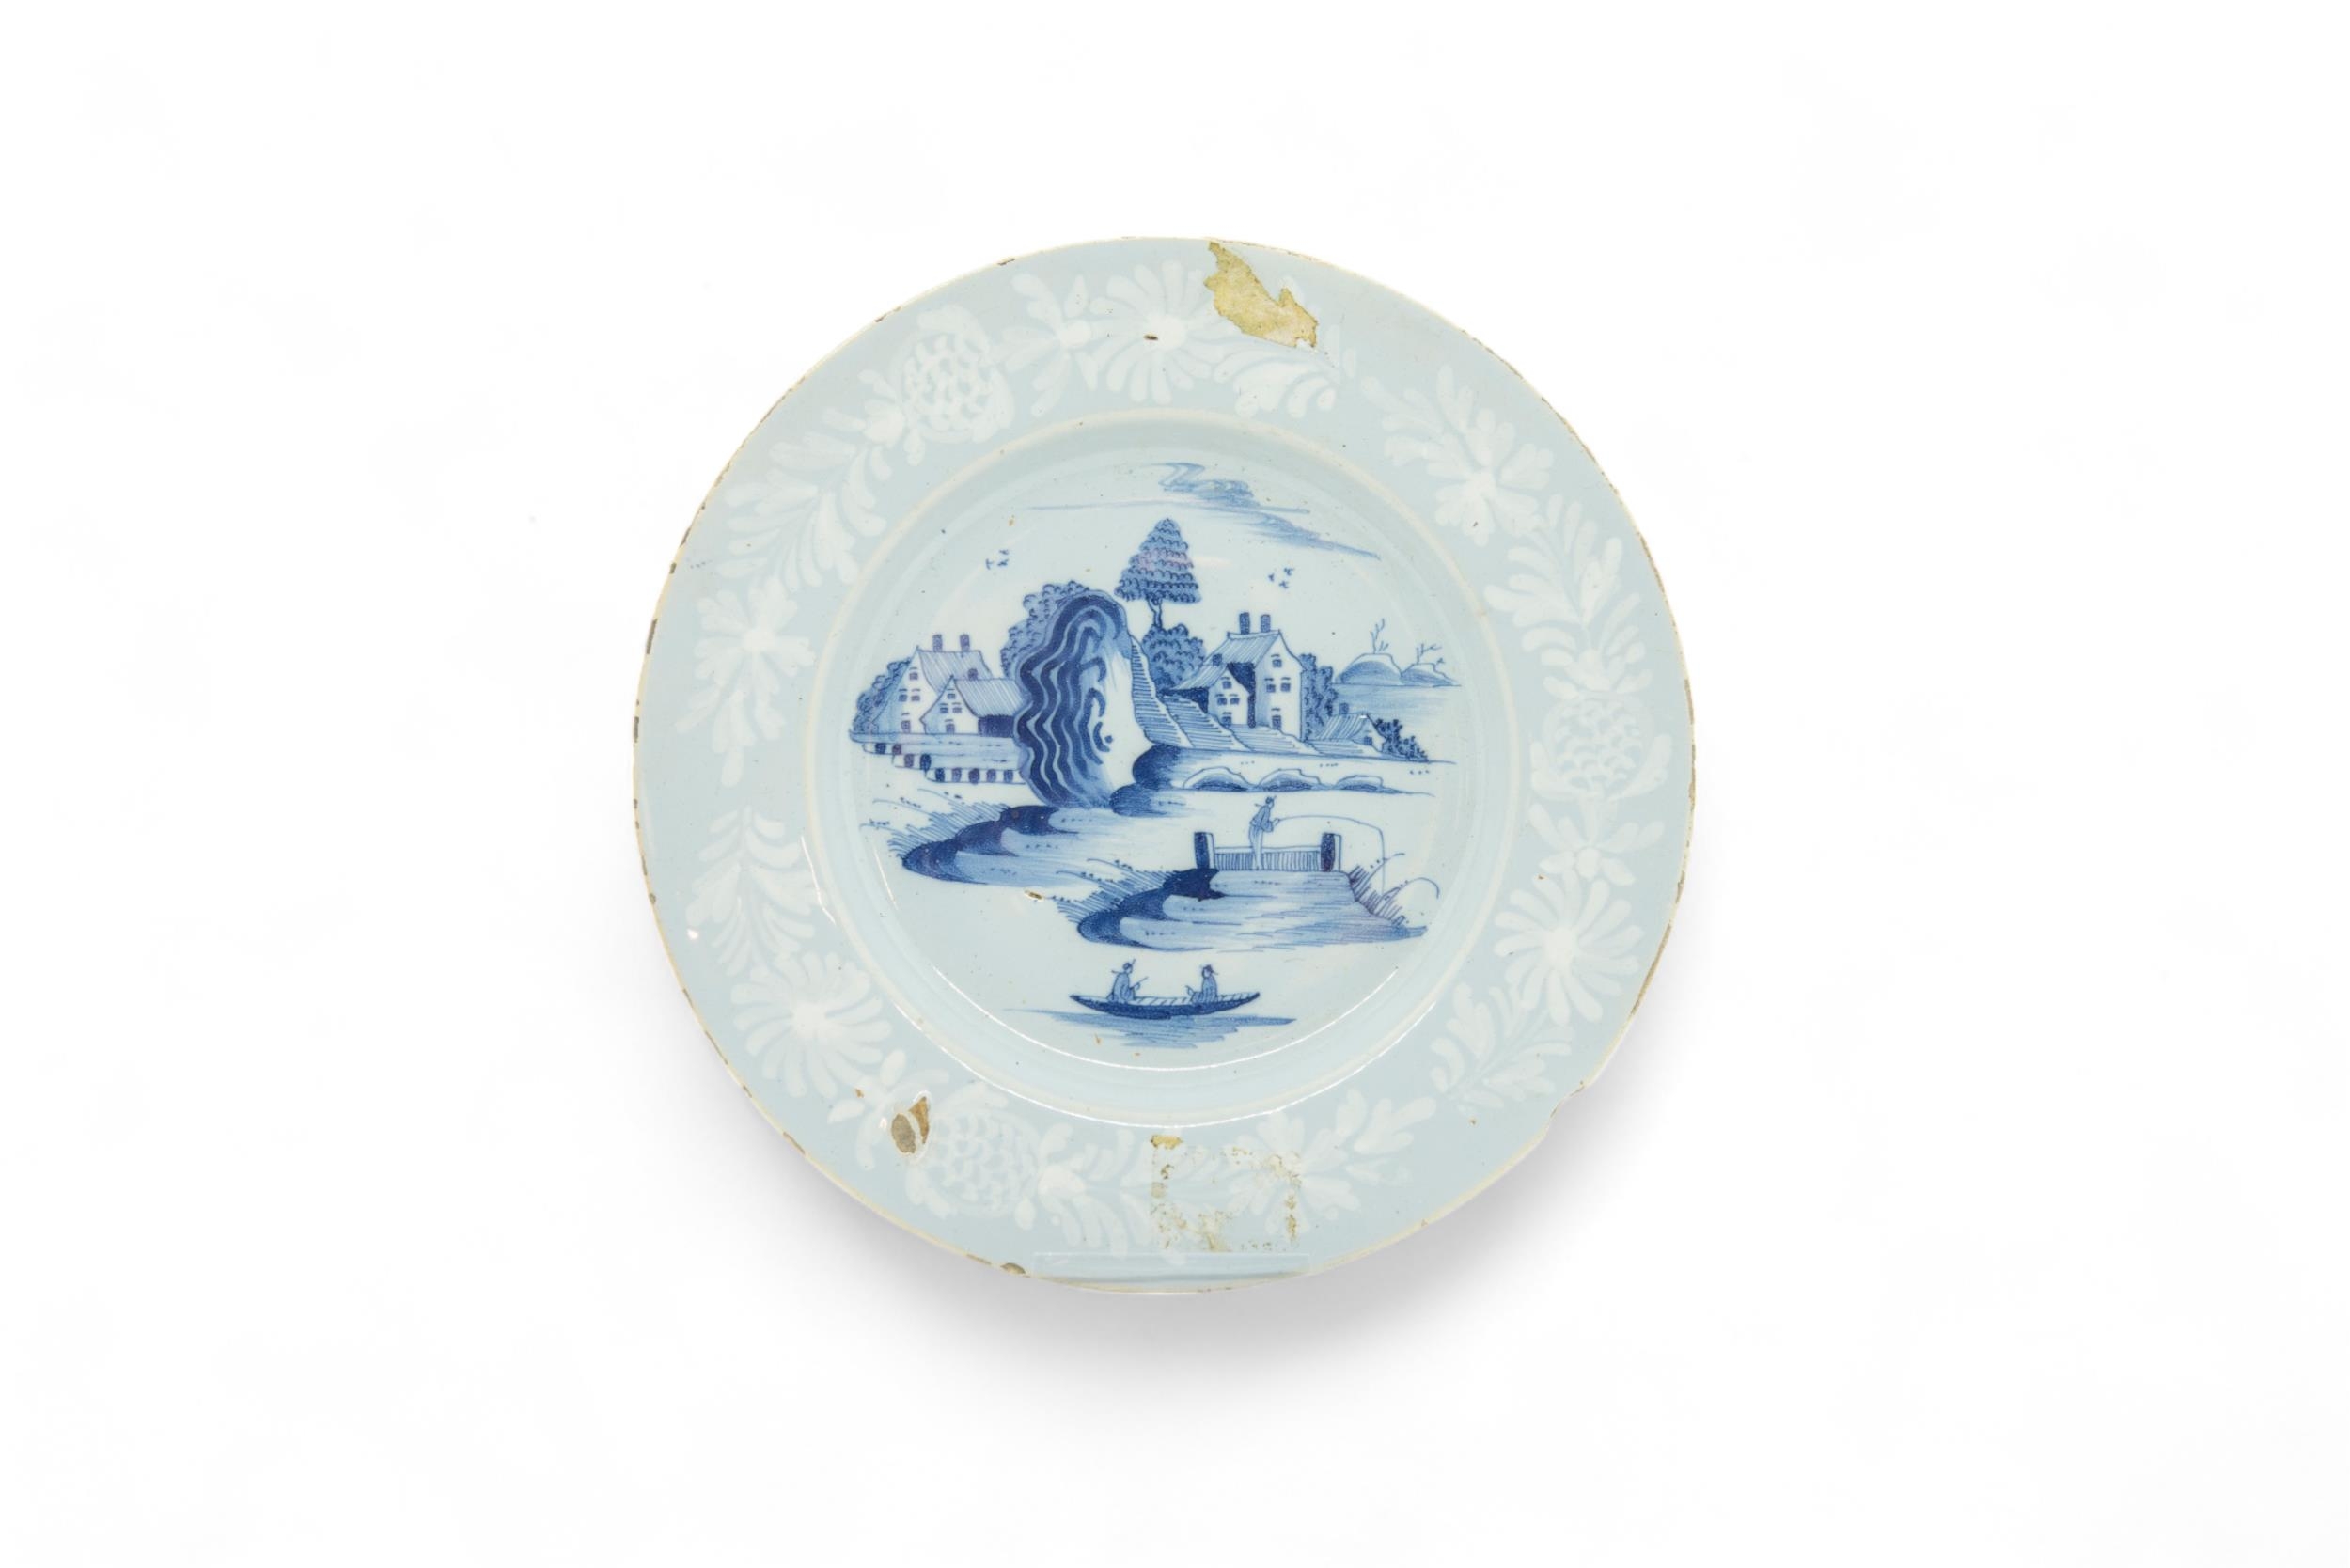 TEN DELFT PLATES 18th Century, including two with bianco sopro bianco decoration and one with a - Image 2 of 10